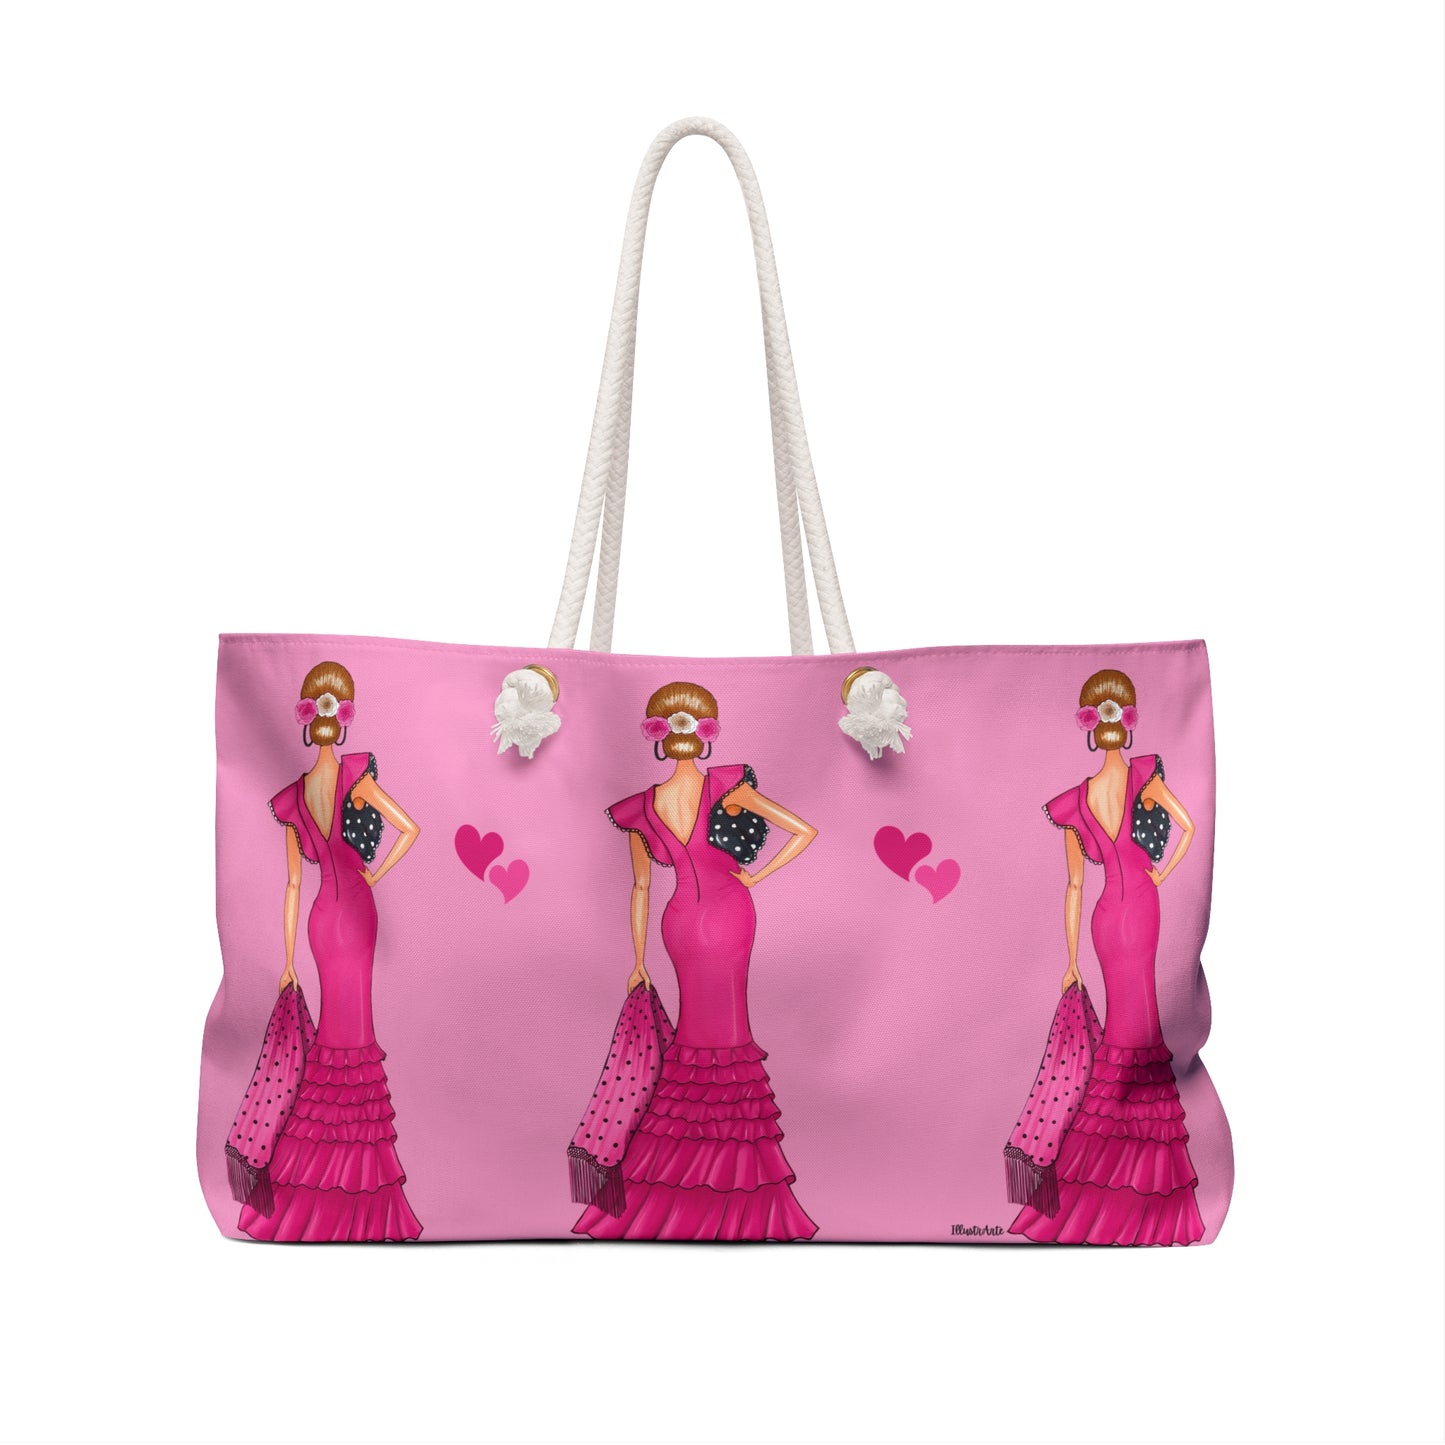 a pink bag with a woman in a pink dress